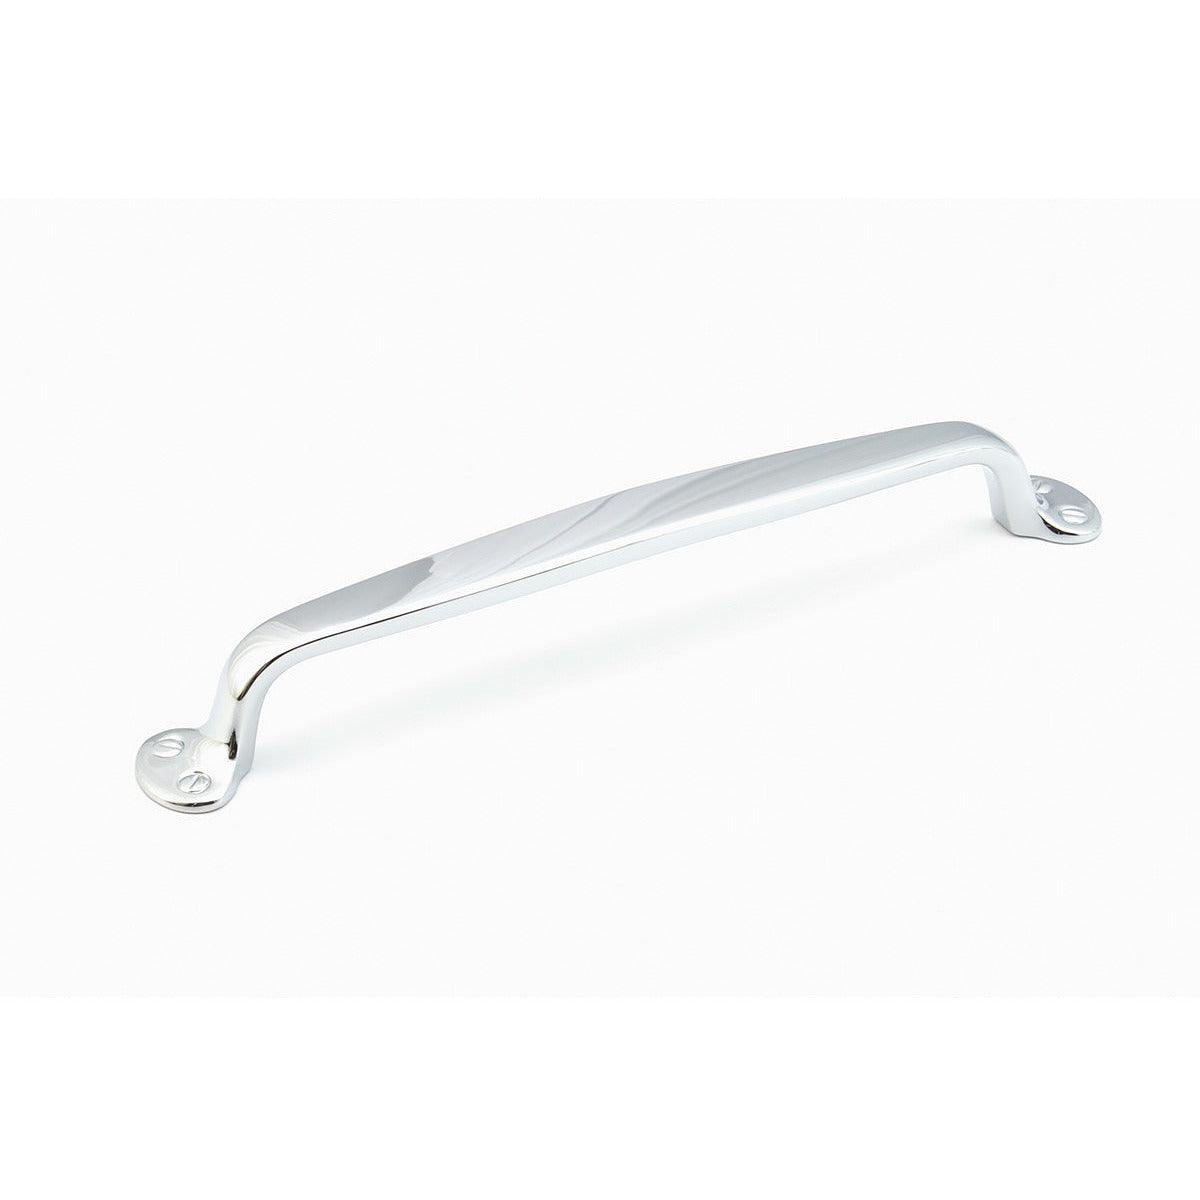 Schaub - Country Appliance Pull - 746-26 | Montreal Lighting & Hardware